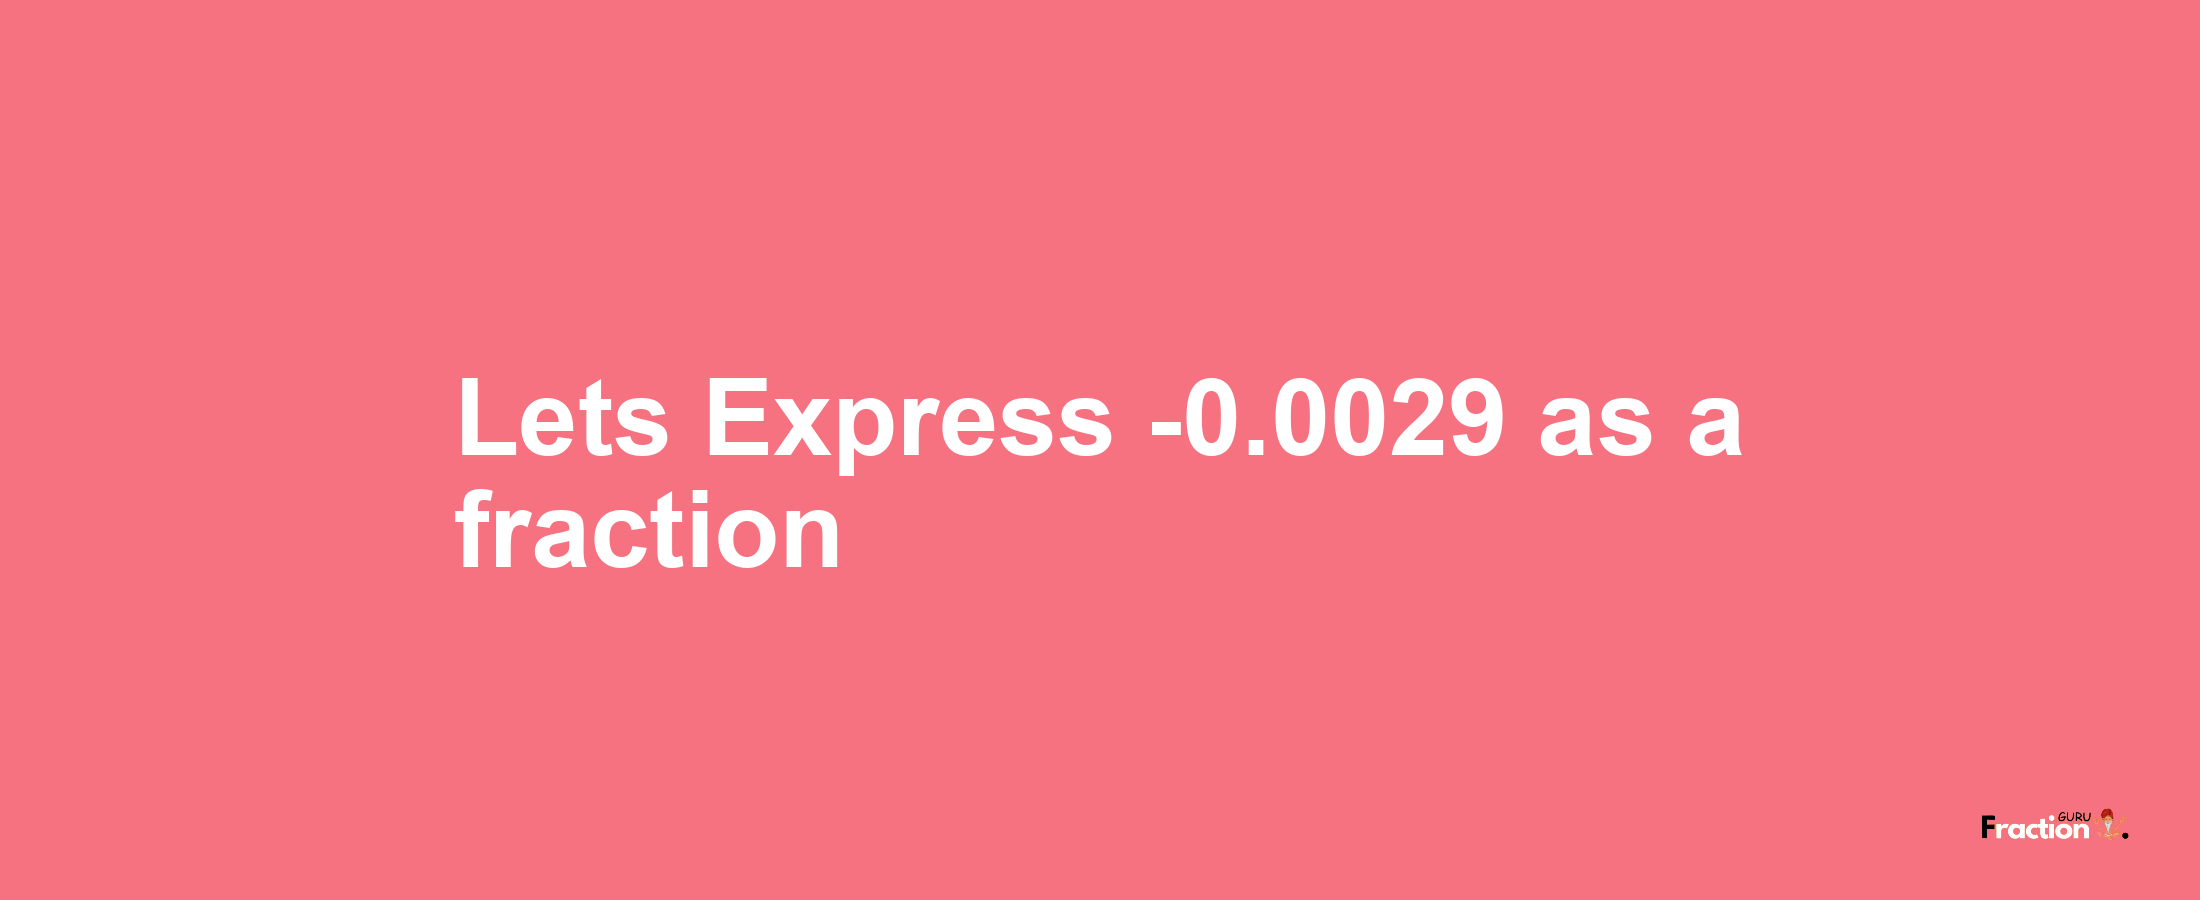 Lets Express -0.0029 as afraction